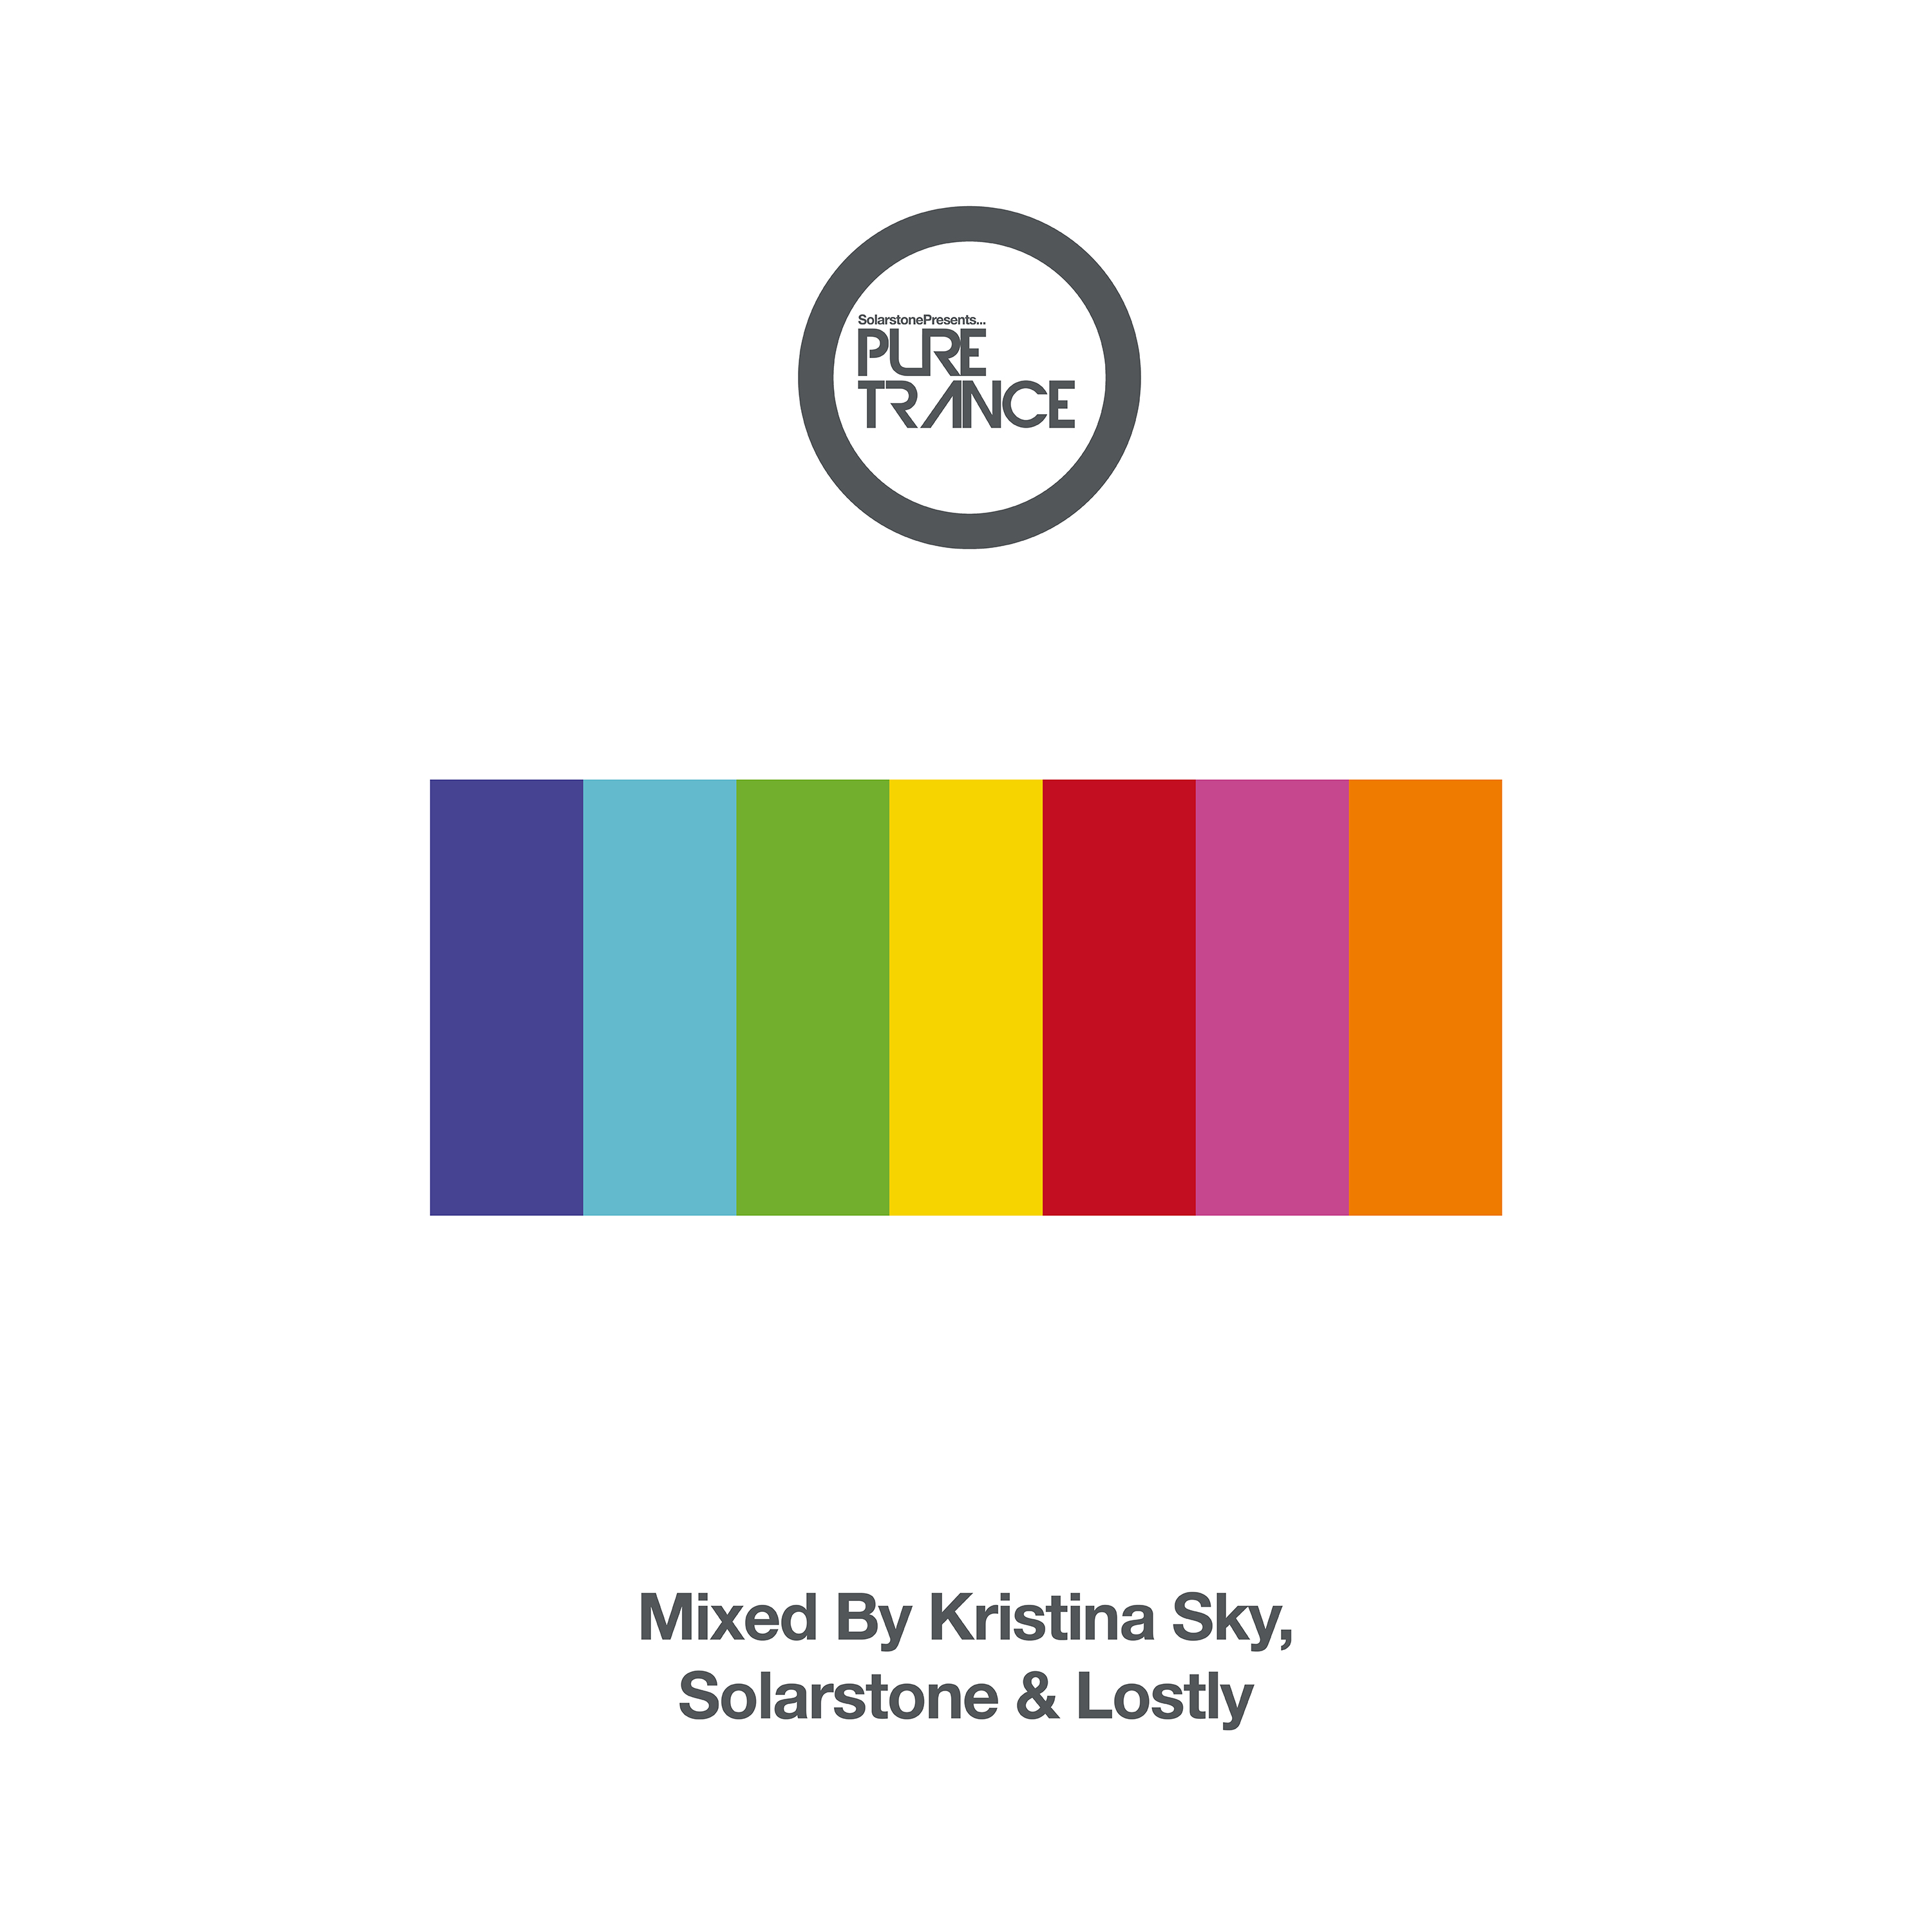 Solarstone presents Pure Trance VII mixed by Solarstone, Kristina Sky and Lostly on Black Hole Recordings